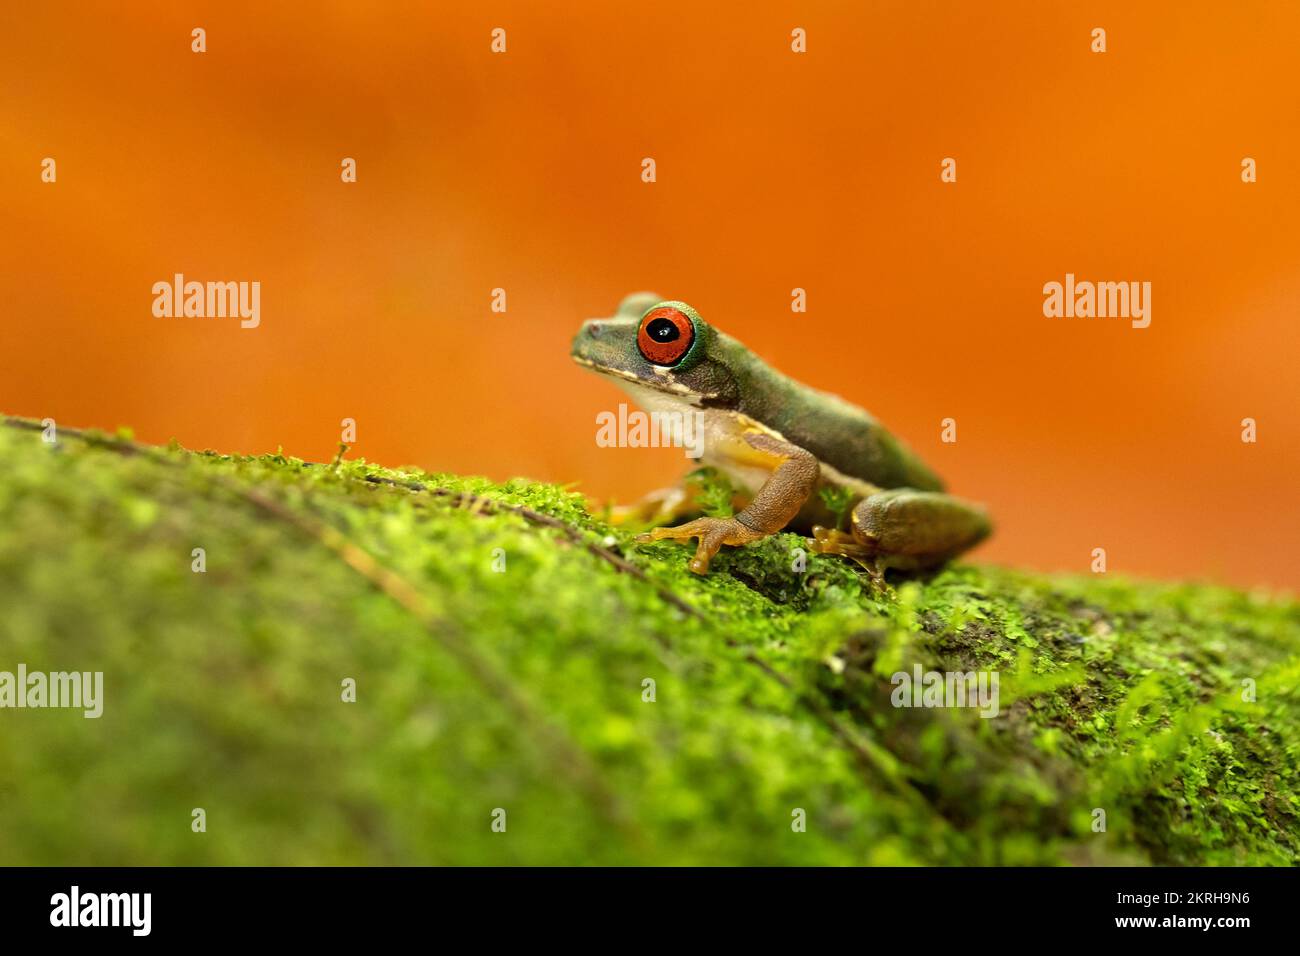 Rufous-eyed brook frog or rufous-eyed stream frog (Duellmanohyla rufioculis), is a species of frog in the family Hylidae. Stock Photo